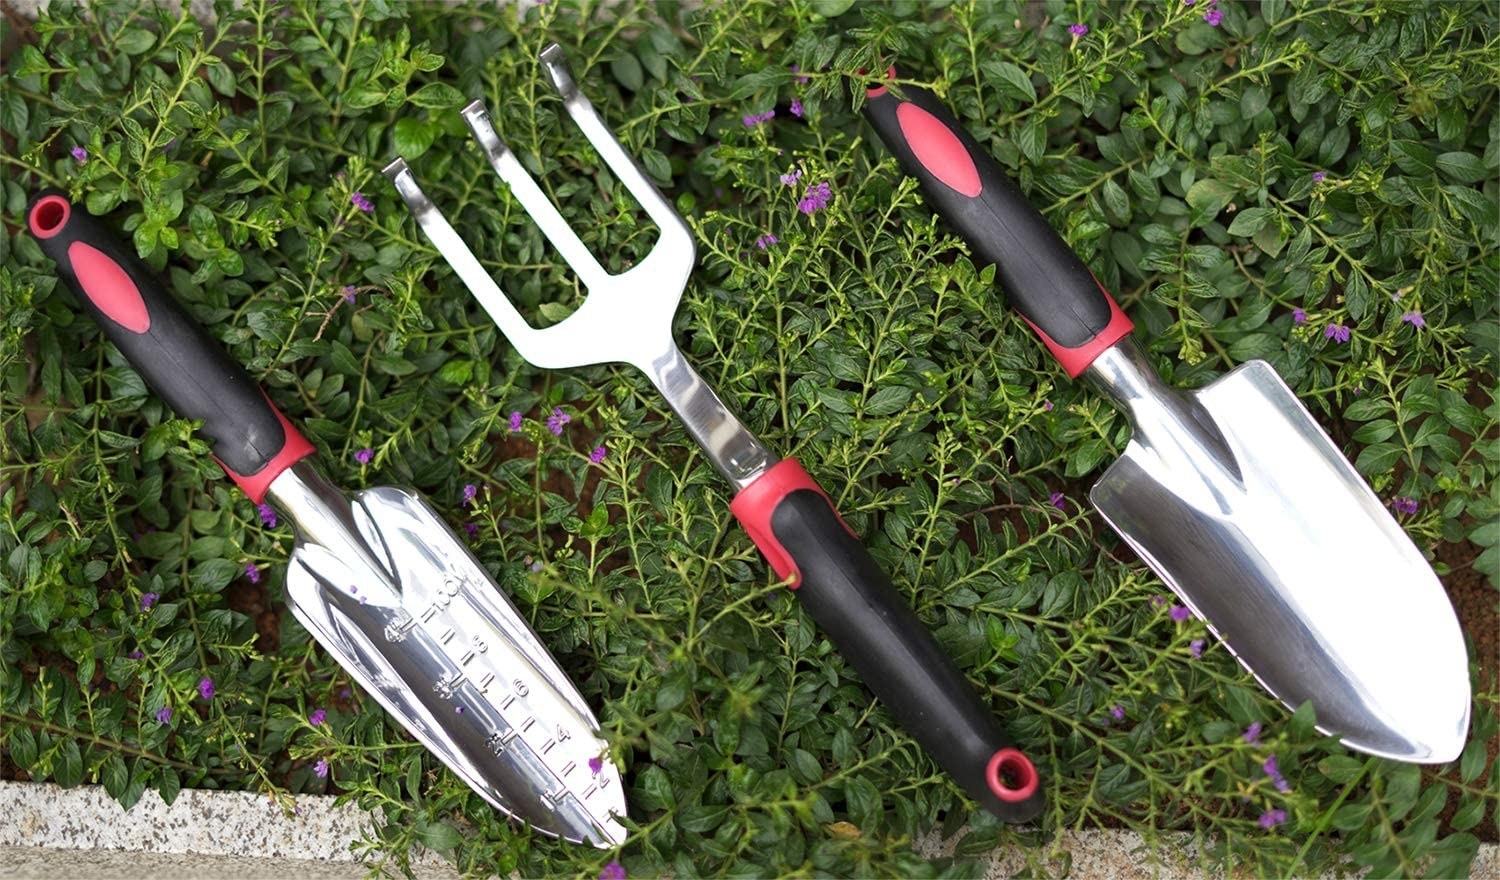 the two trowels and hand rake in the grass